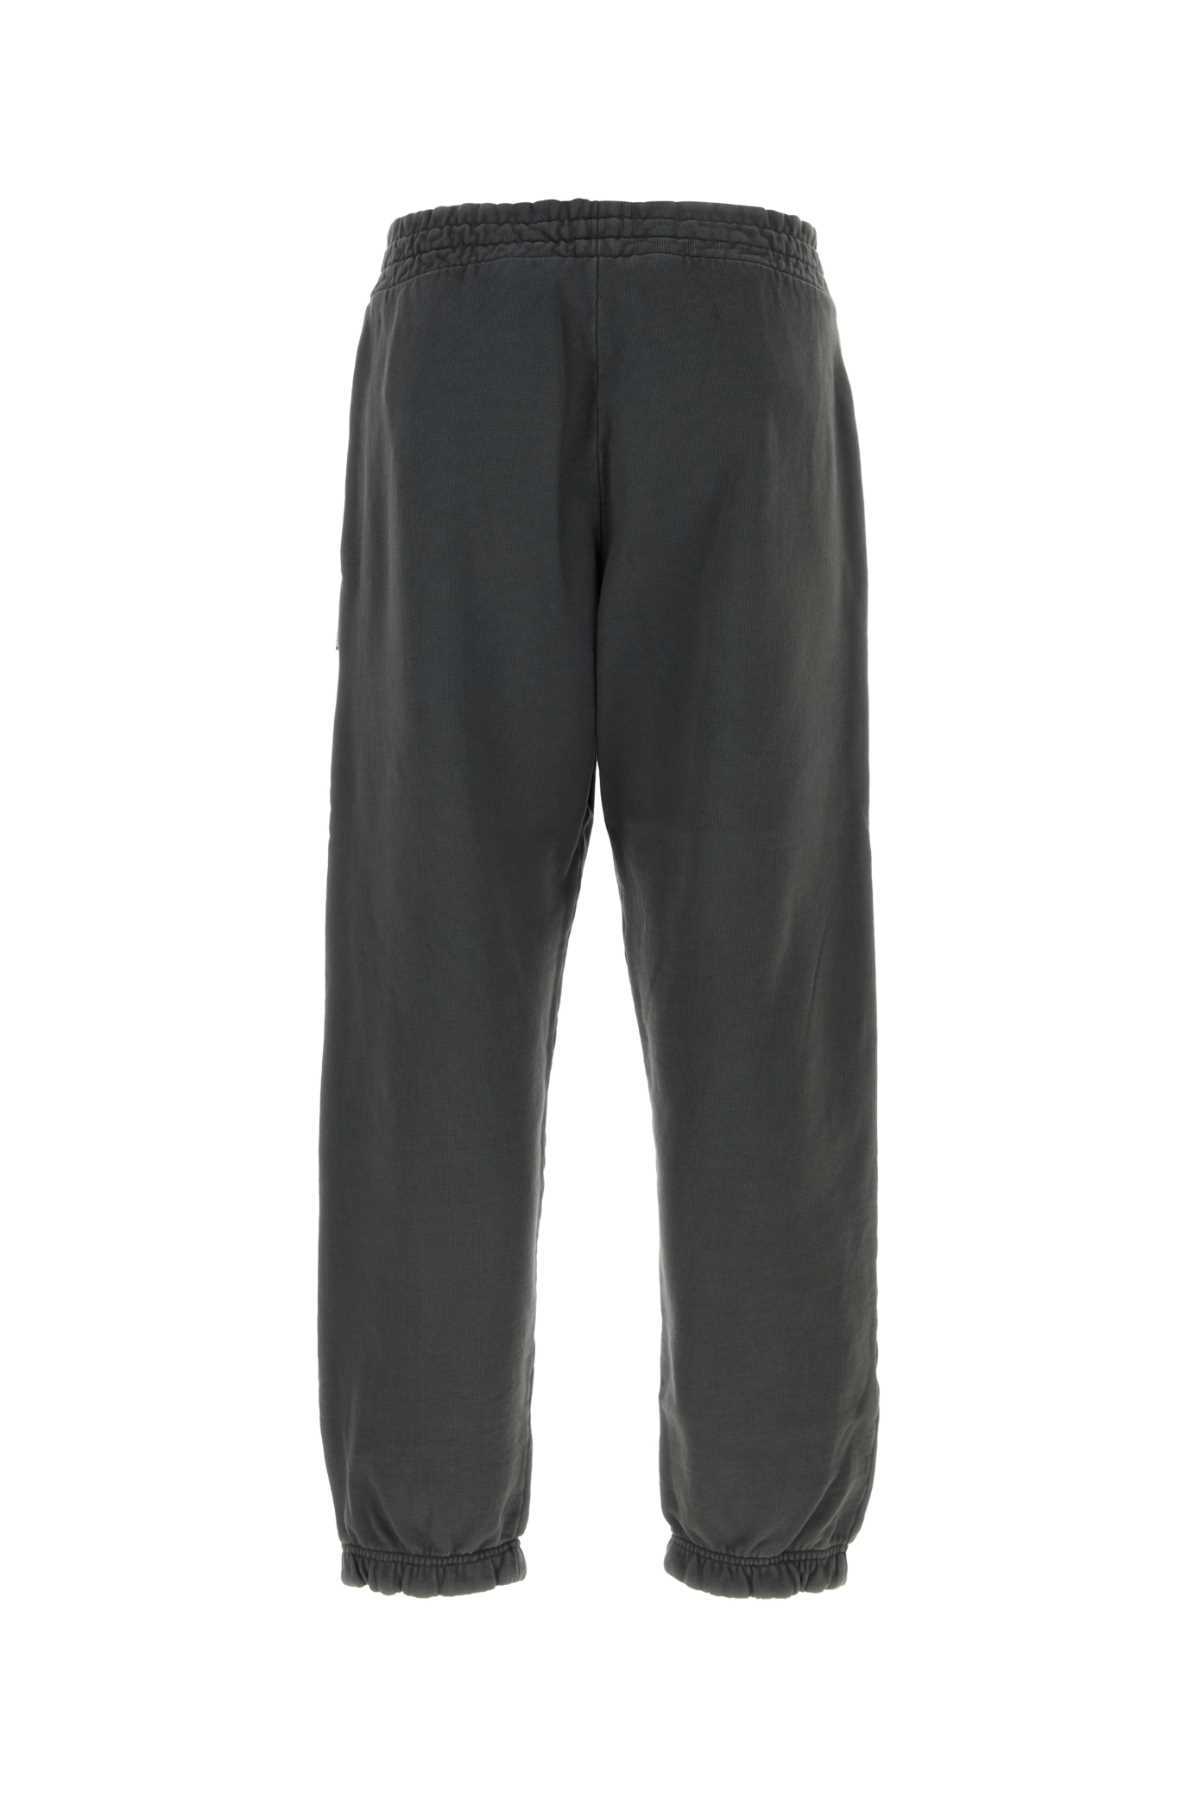 Palm Angels Anthracite Cotton Joggers In Darkgrey